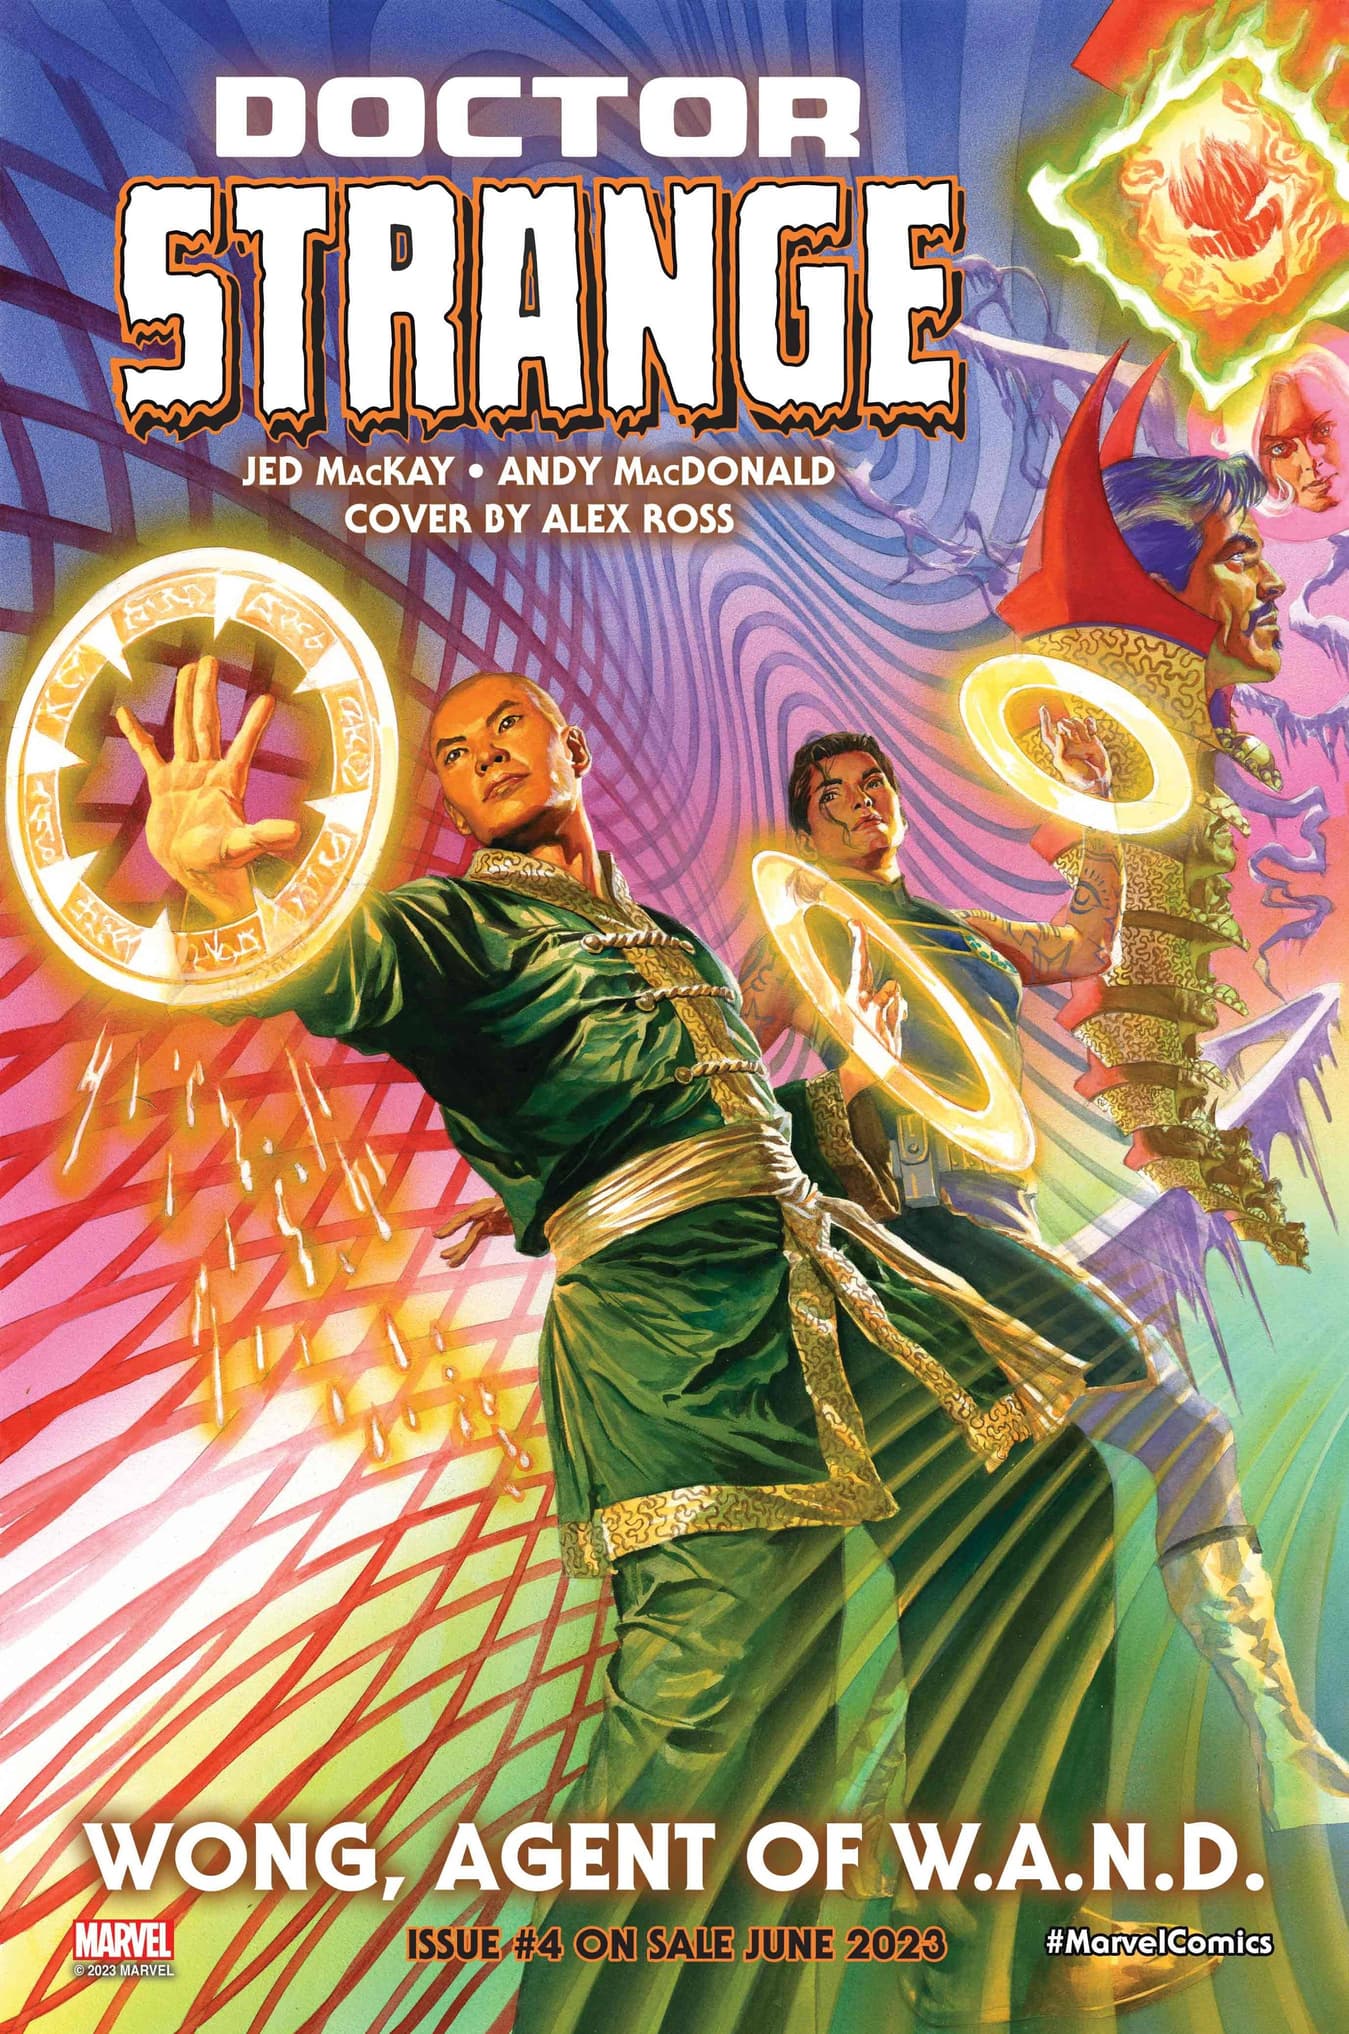 DOCTOR STRANGE #4 cover by Alex Ross